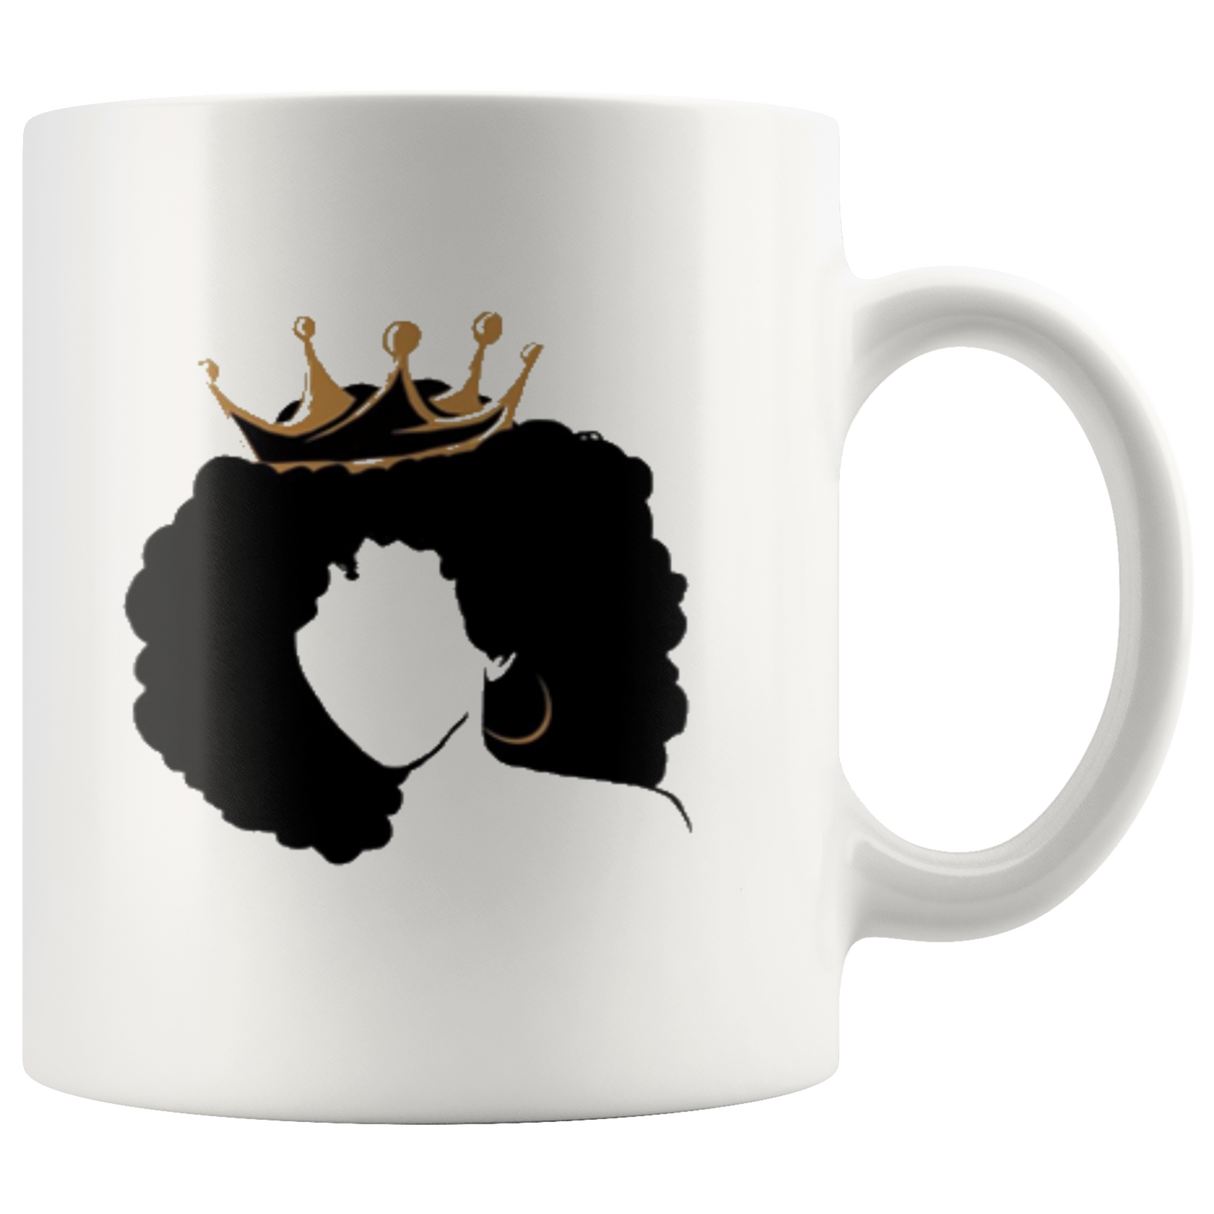 Lady Queen Afro Coffee Mug - Shop Sassy Chick 